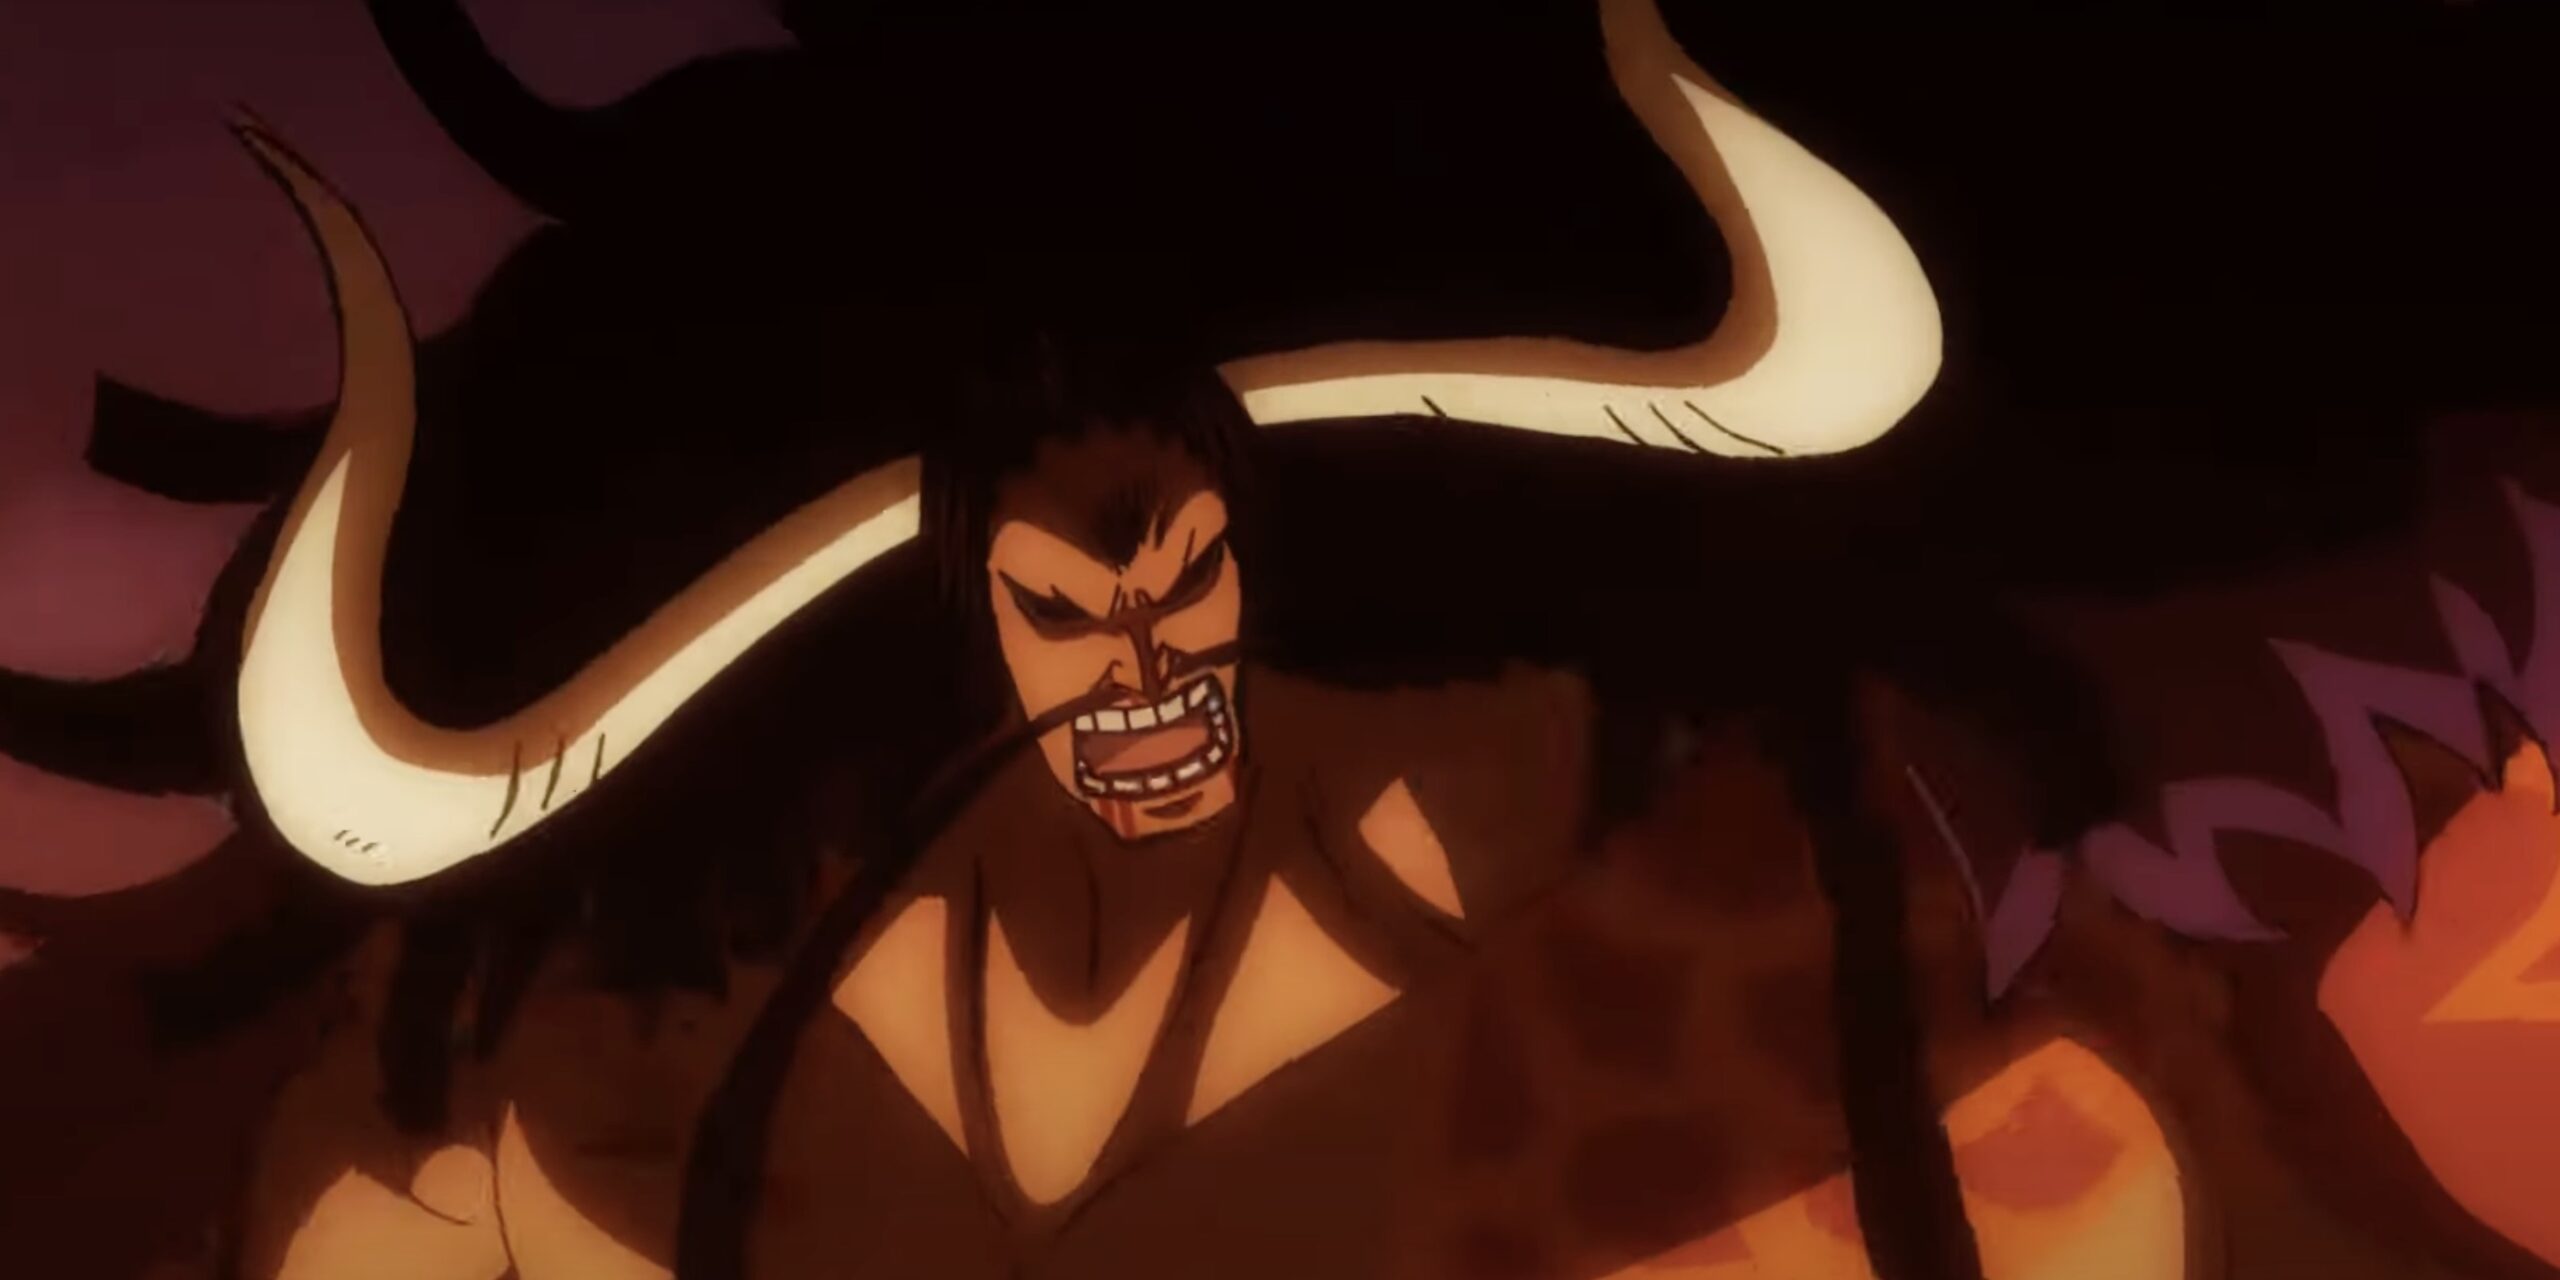 Fans Excitedly Request Clash: Kaido from One Piece vs. Mahoraga from Jujutsu Kaisen